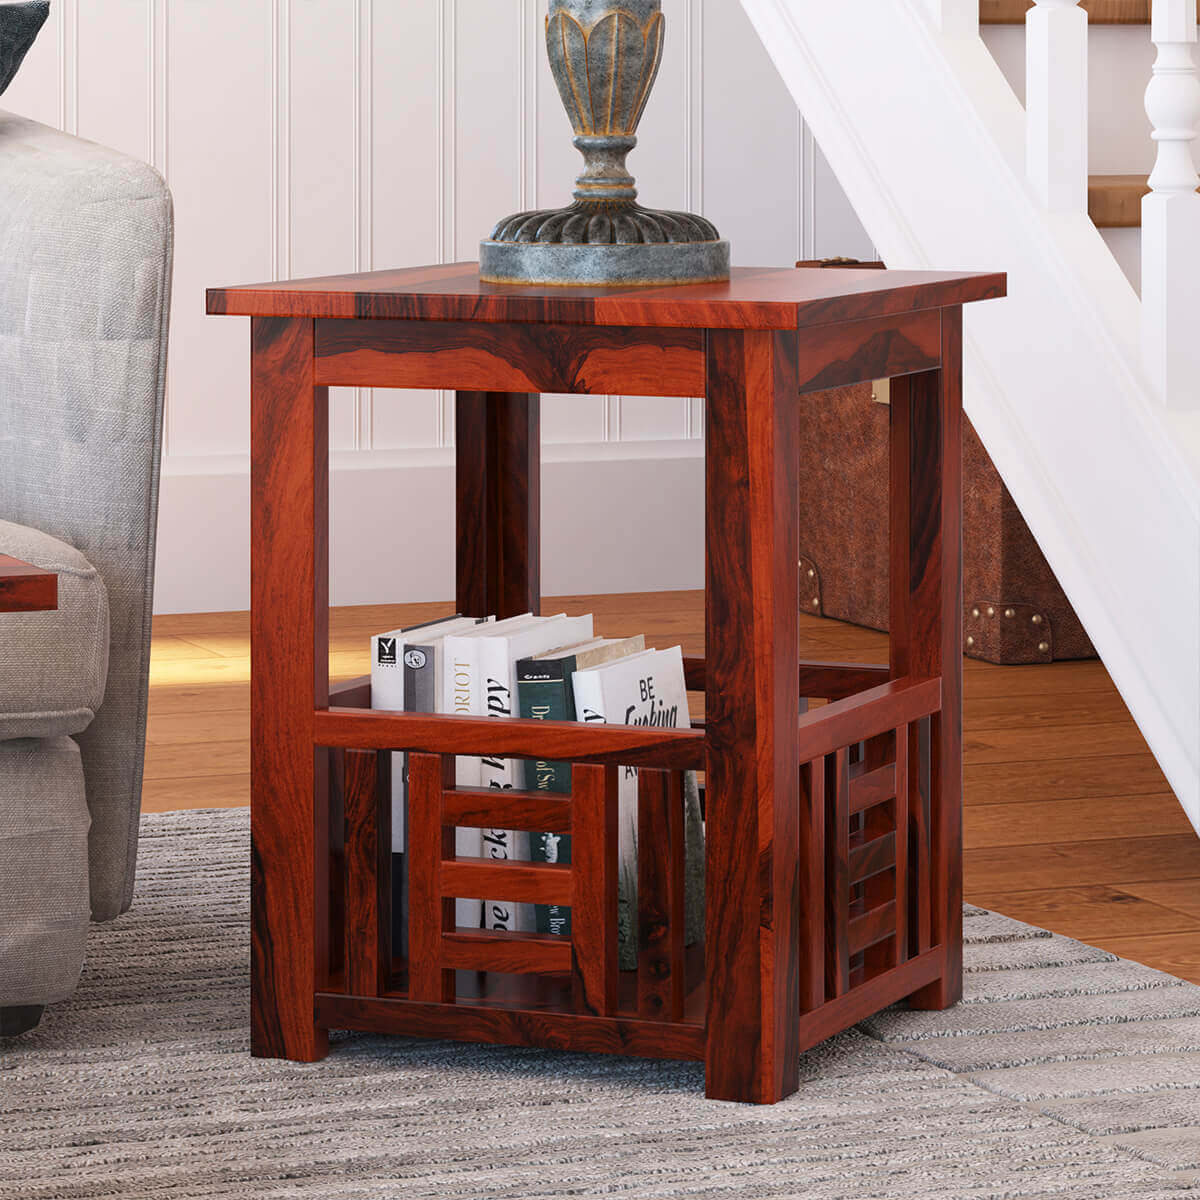 https://www.sierralivingconcepts.com/images/thumbs/0398588_yantis-mission-style-rustic-solid-wood-basket-2-tier-end-table.jpeg